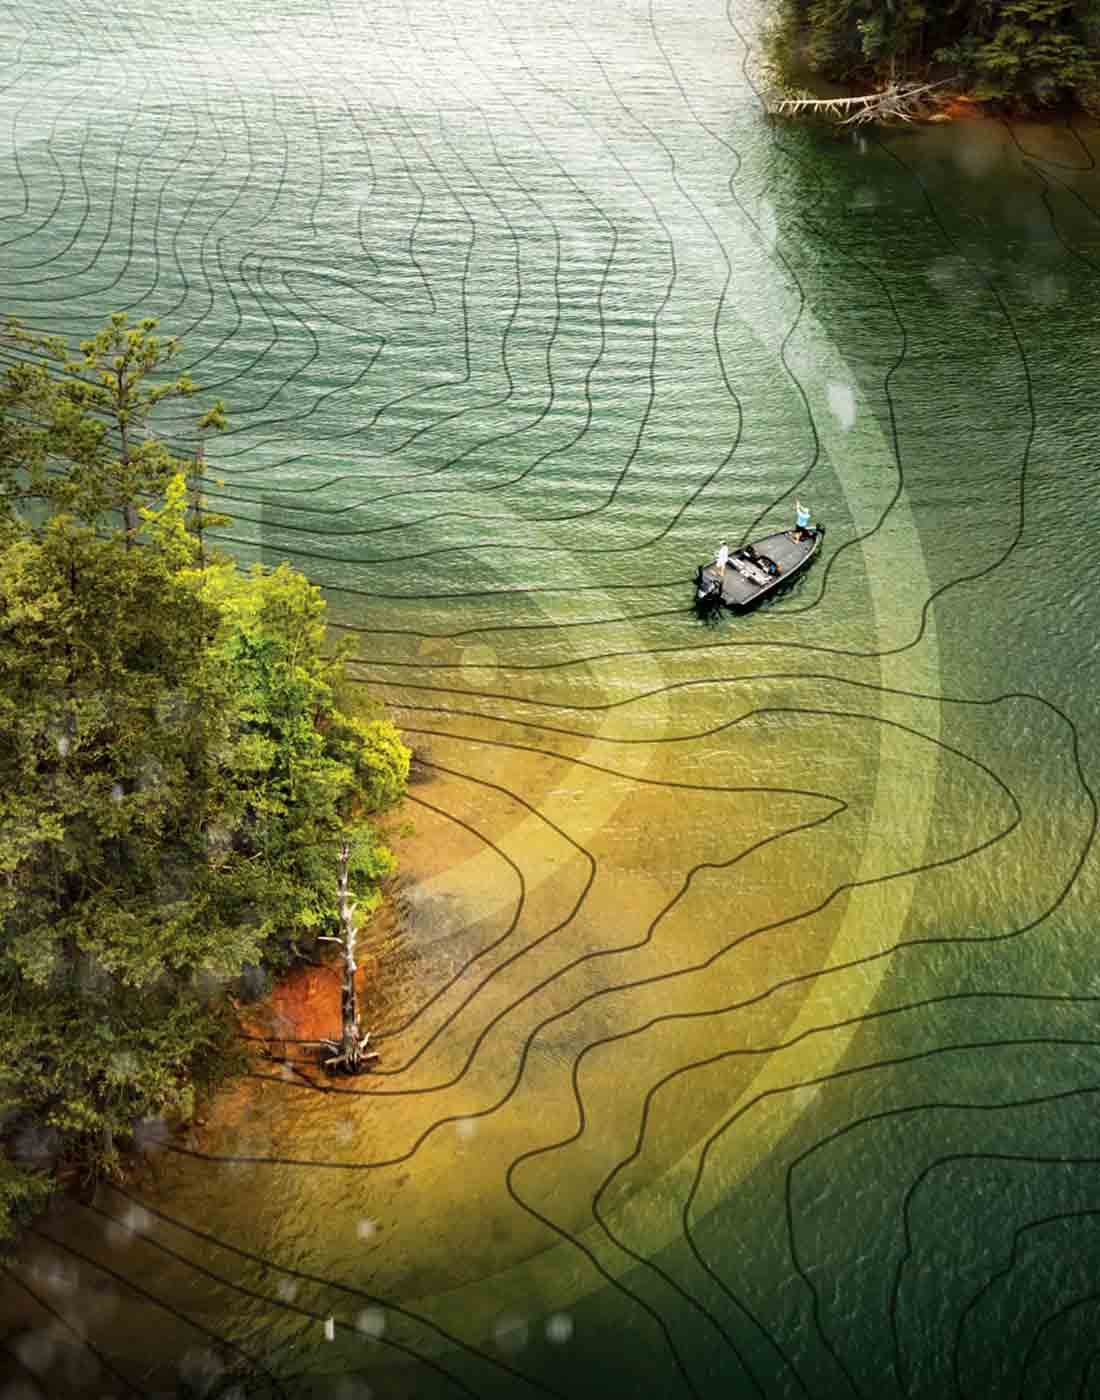 View from sky of fishing boat on a freshwater lake surrounded by virtual bathymetry lines